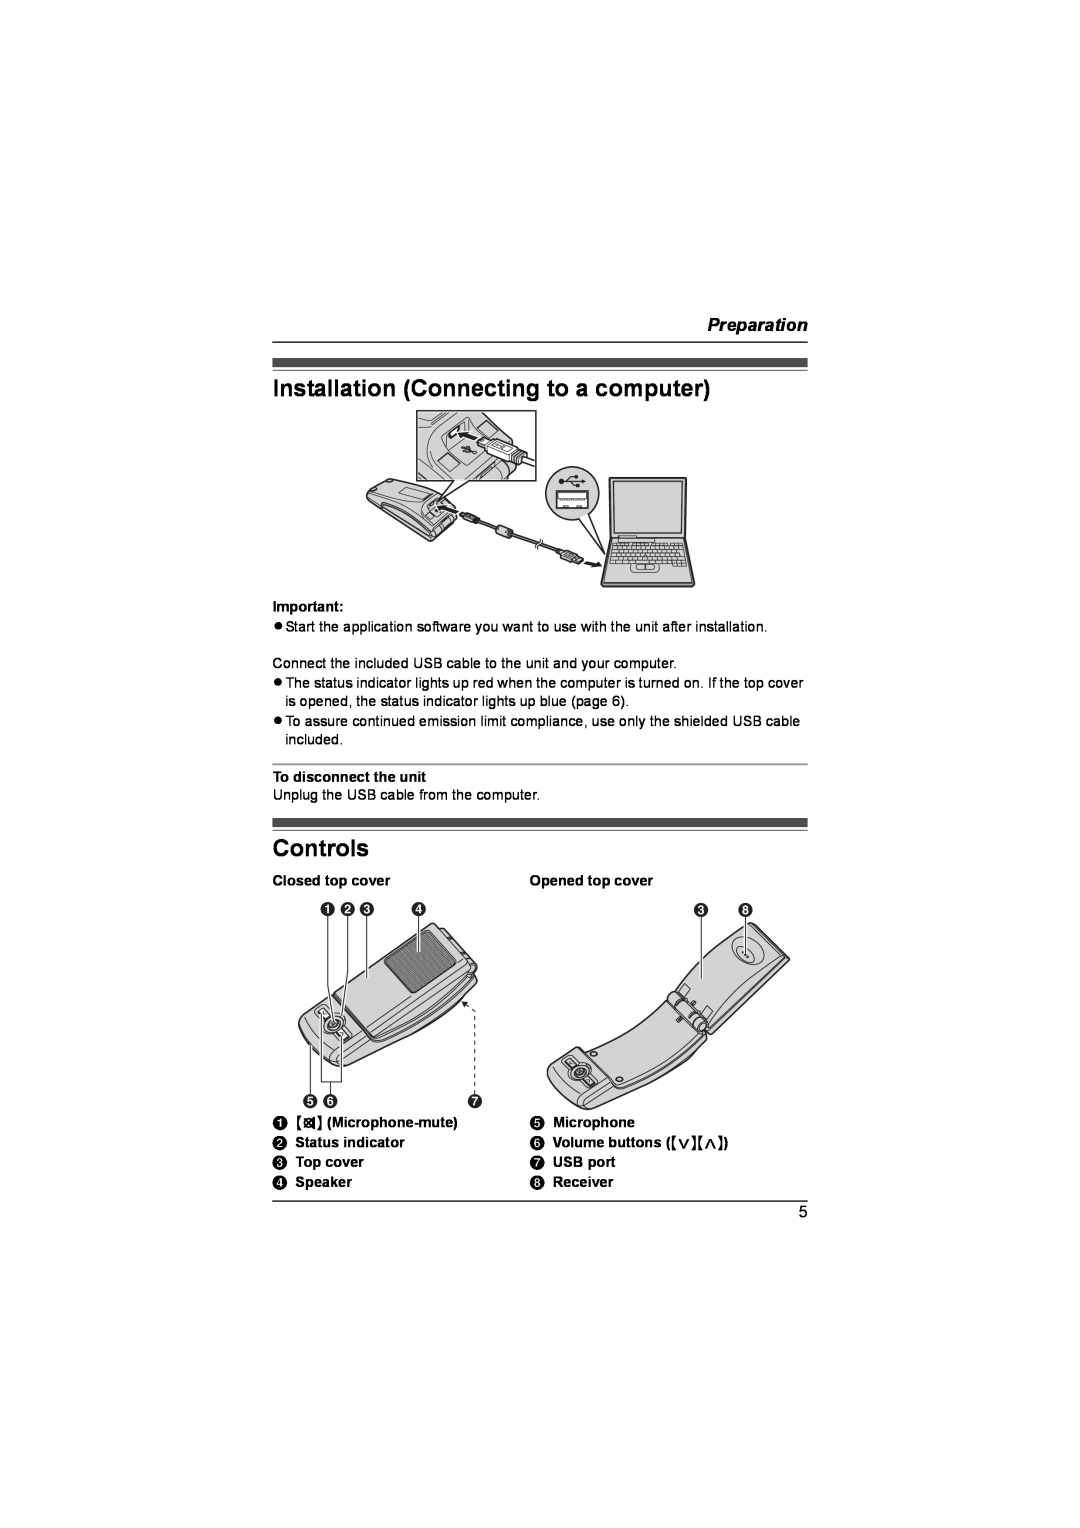 Panasonic KX-TS710 operating instructions Installation Connecting to a computer, Controls, Preparation, A B C D 